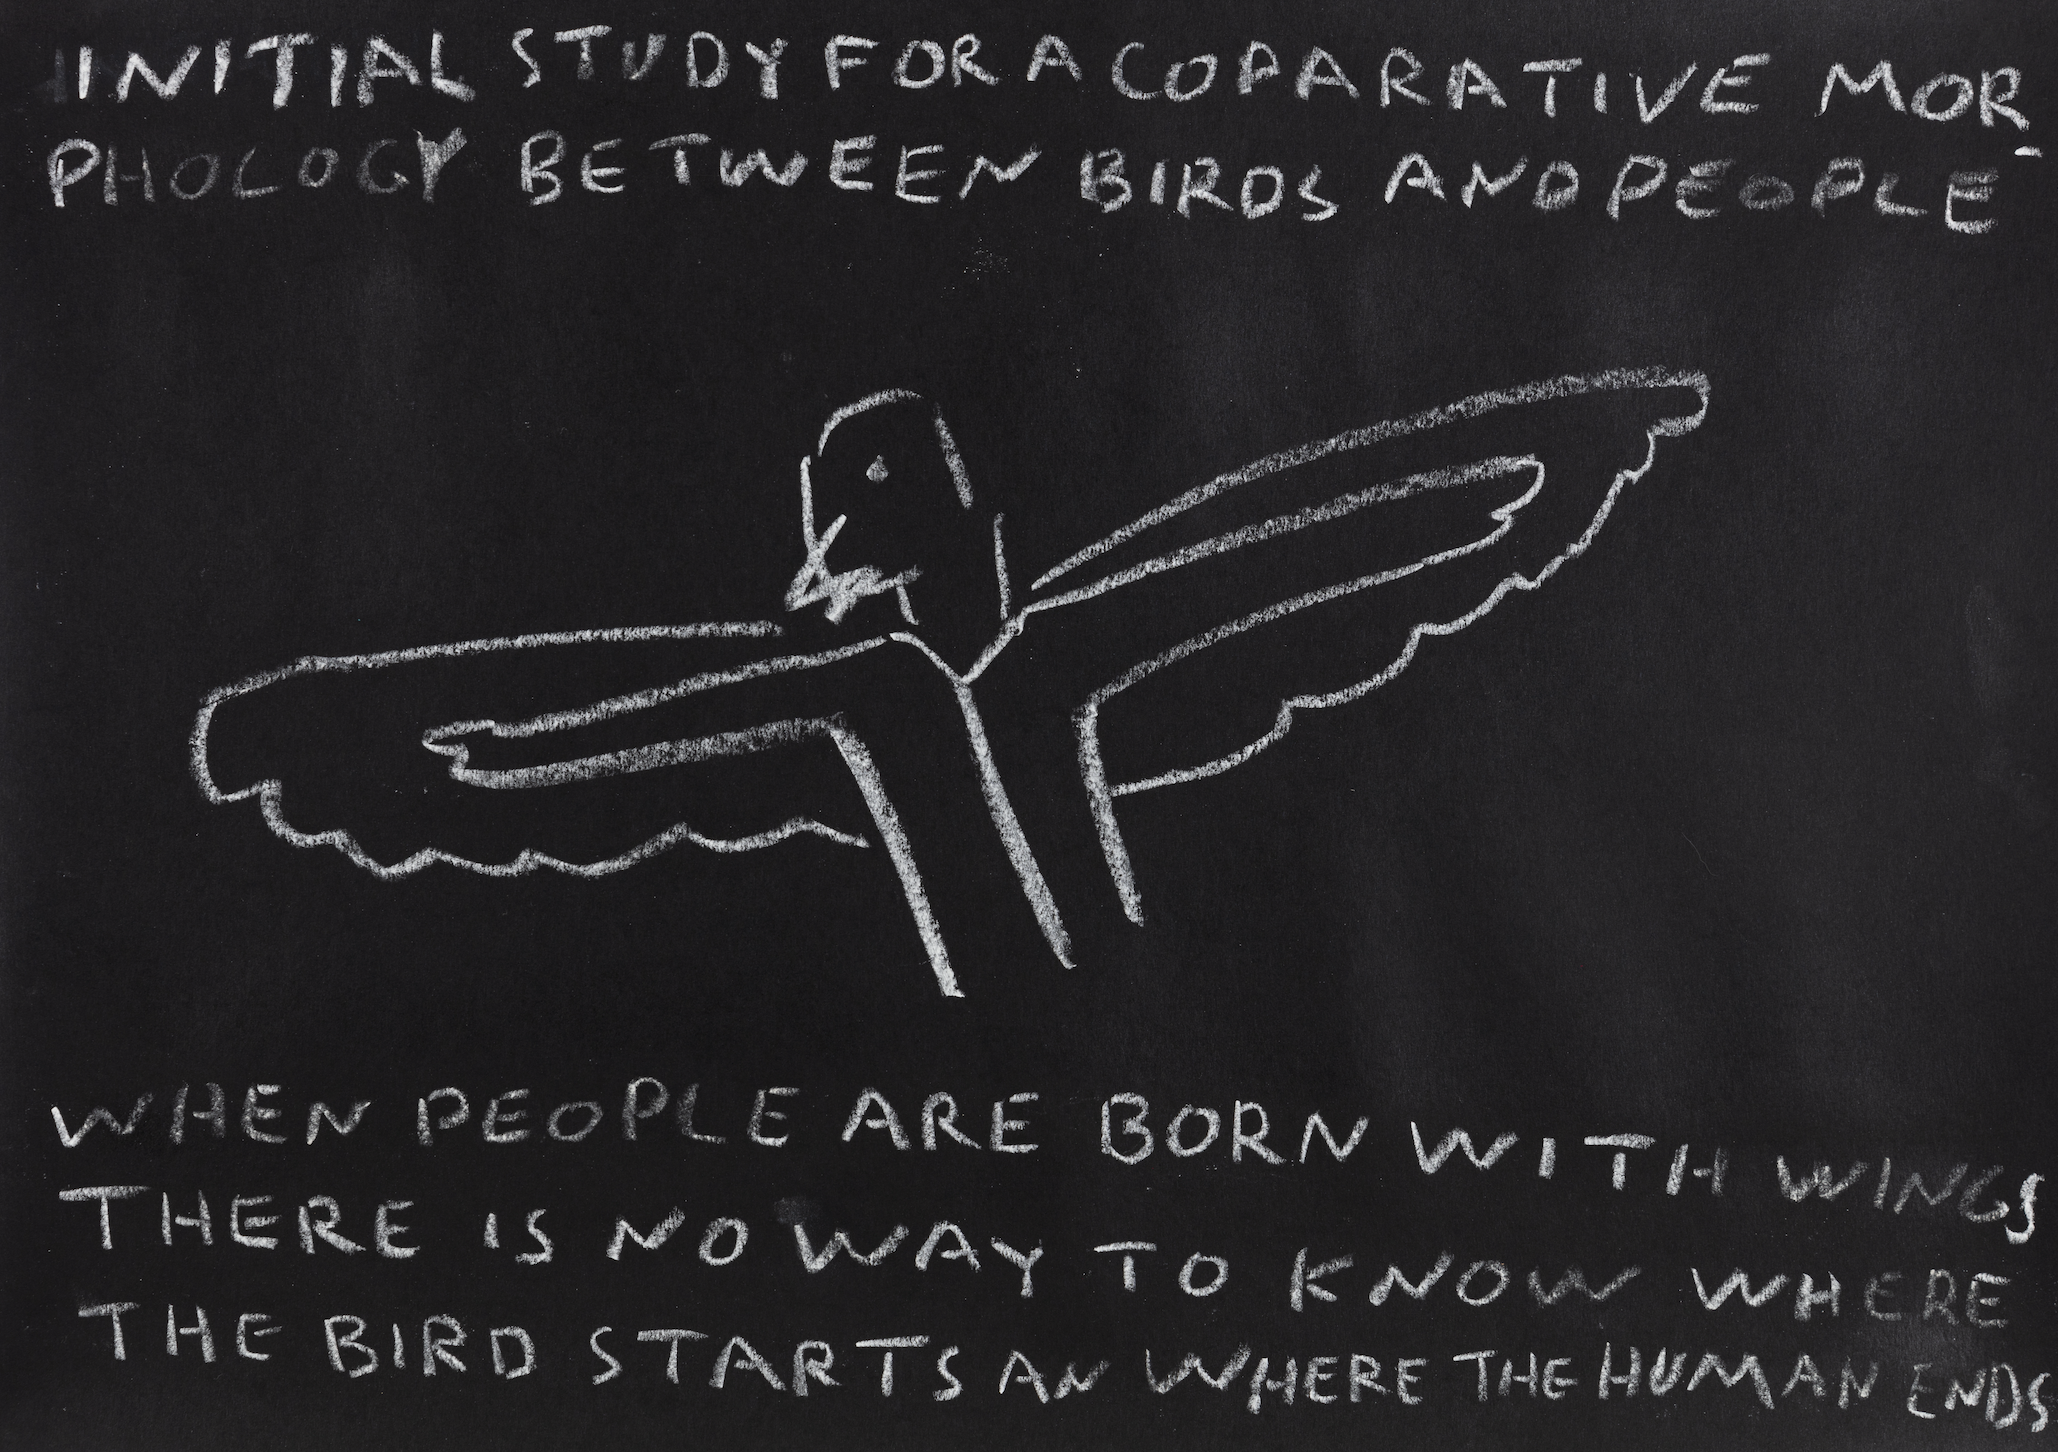 Paulo Nazareth - INITIAL STUDY FOR A COMPARATIVE MORPHOLOGY BETWEEN BIRDS AND PEOPLE [When people are born with wings there is no way to know where the bird starts an where the human ends], 2021